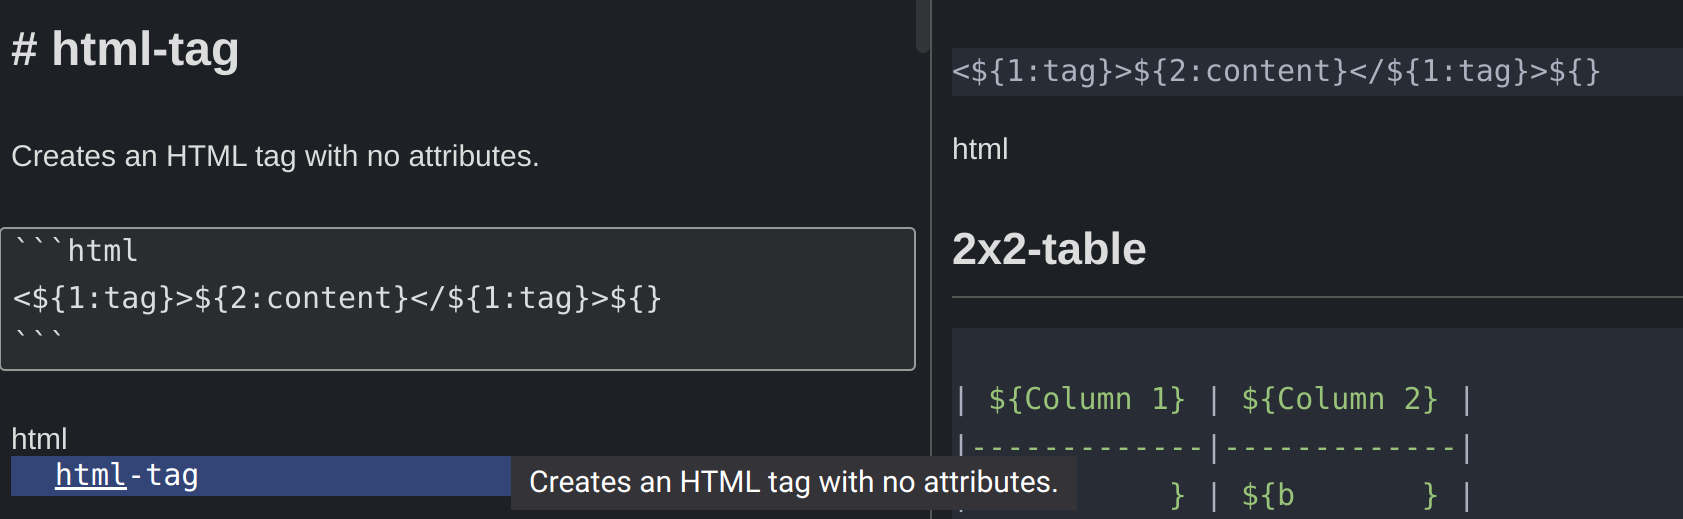 An autocompletion menu is shown, containing an HTML tag autocompletion. The snippet code for the autocompletion is also shown: '<${1:tag}>${2:content}</${1:tag}>${}'